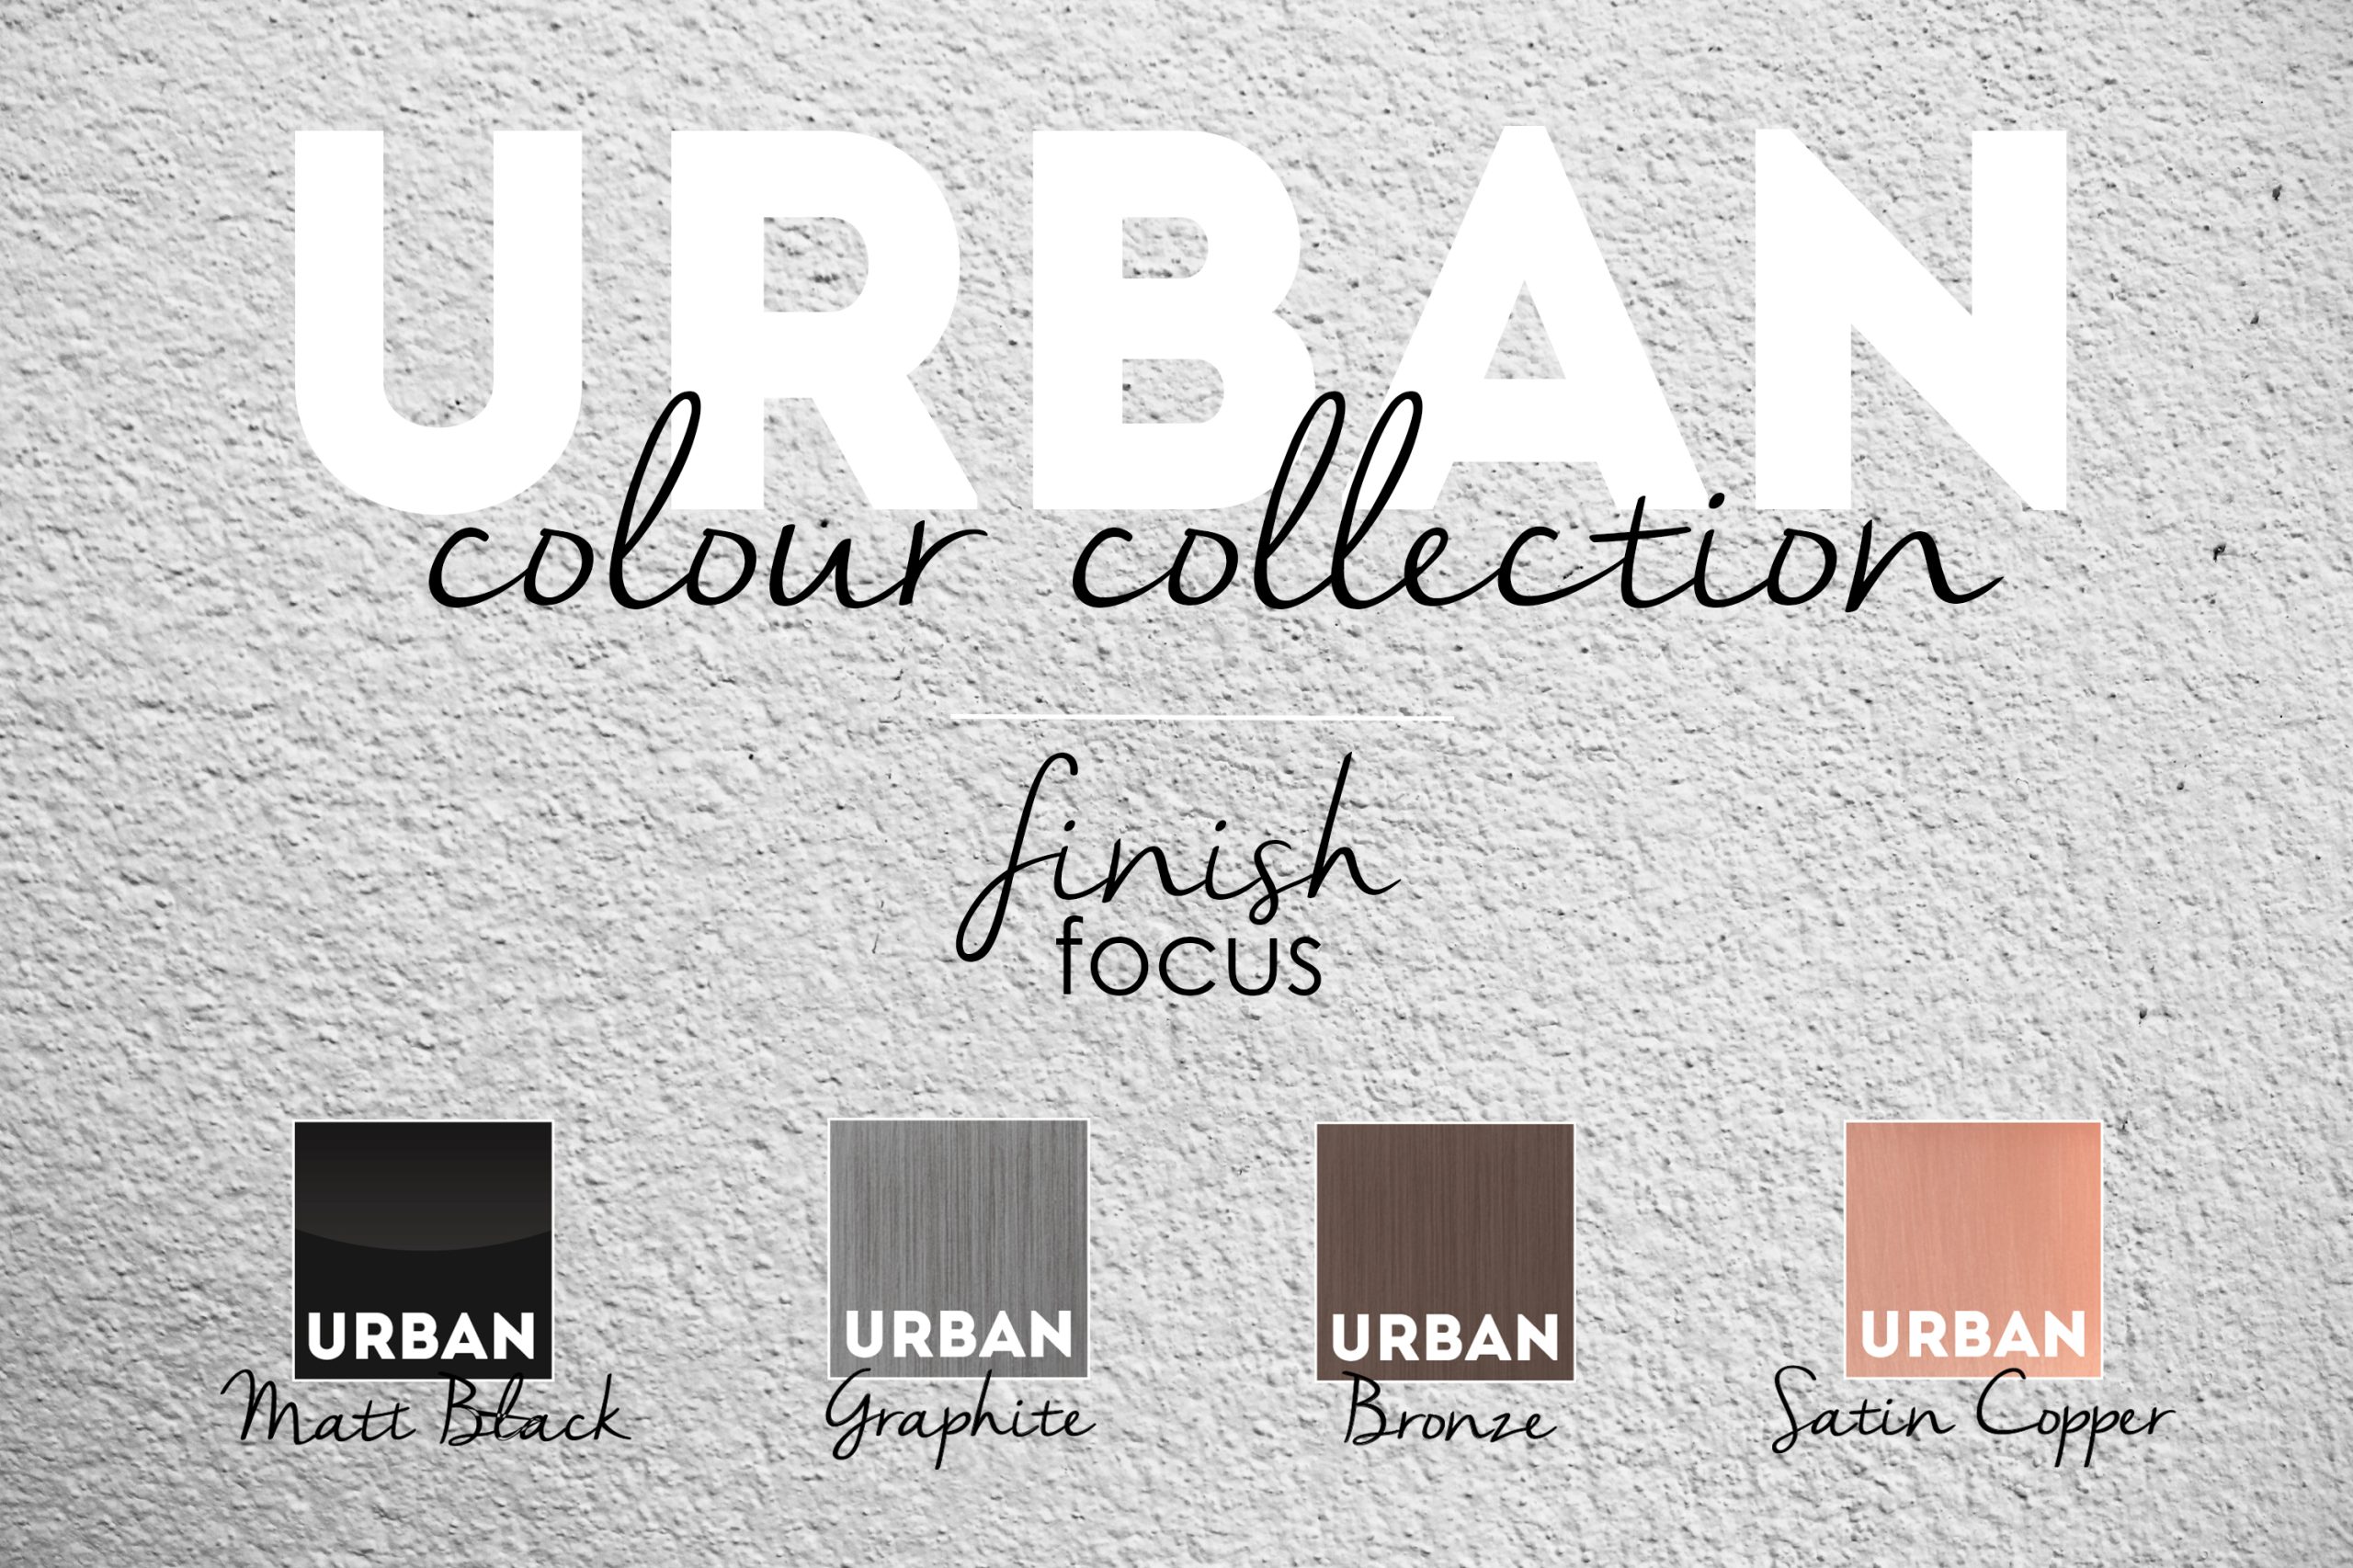 Be inspired by Urban Finishes!